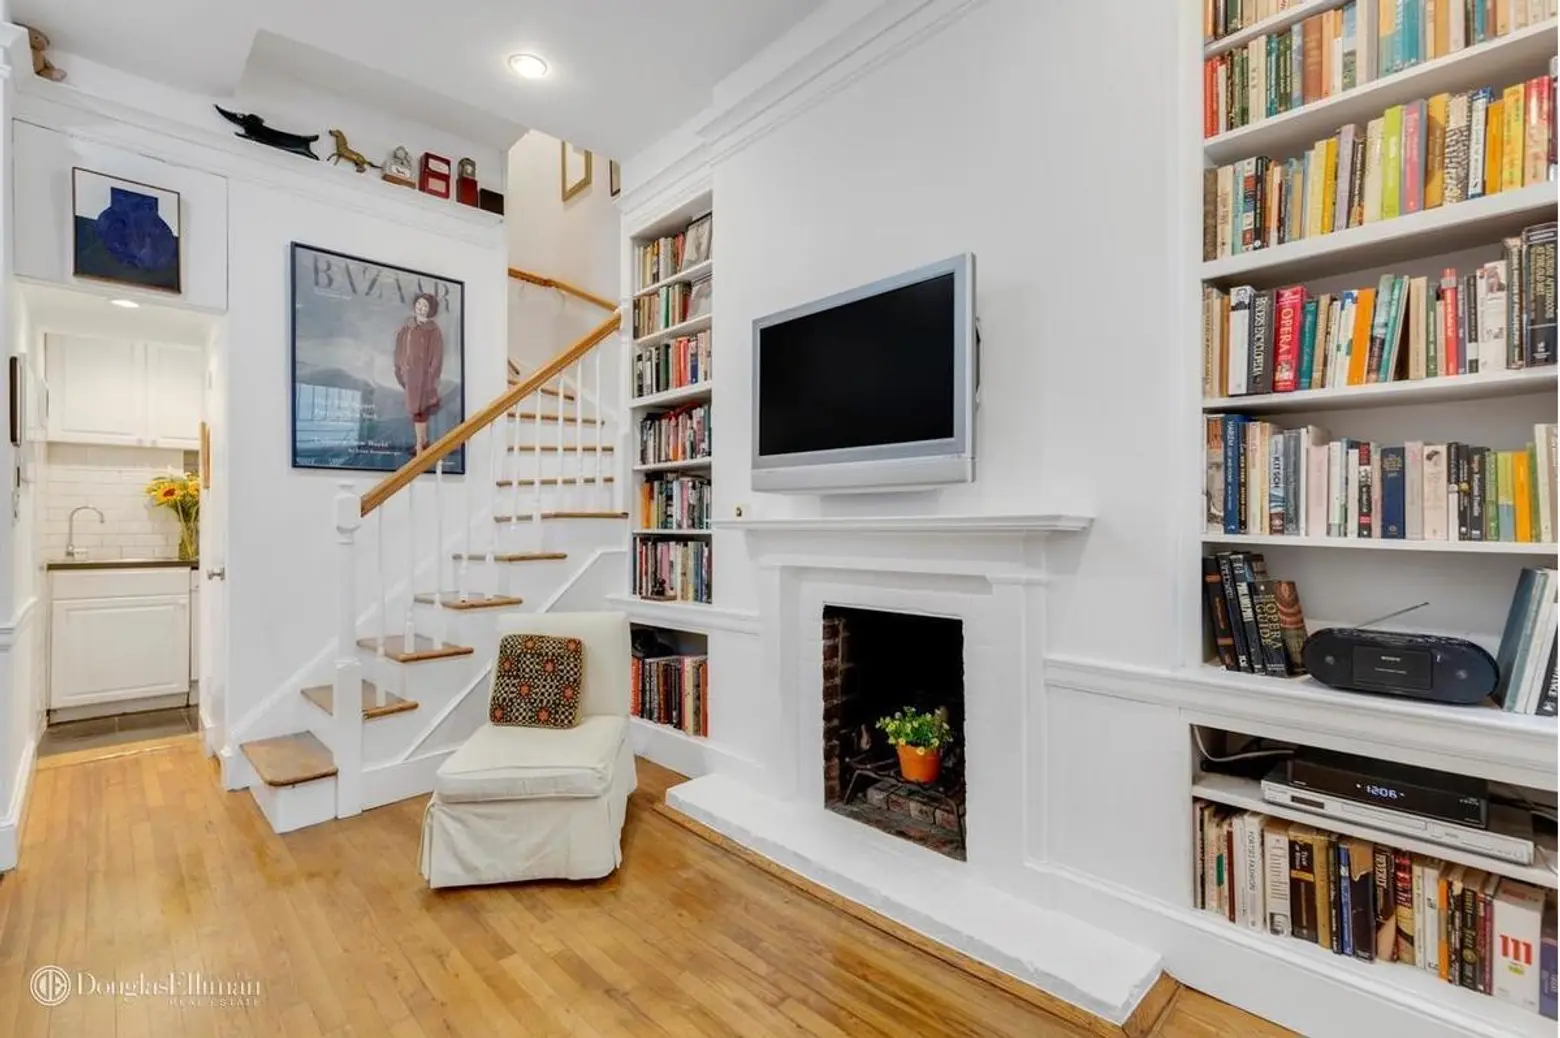 Architectural history meets West Village charm in this $950K duplex co-op